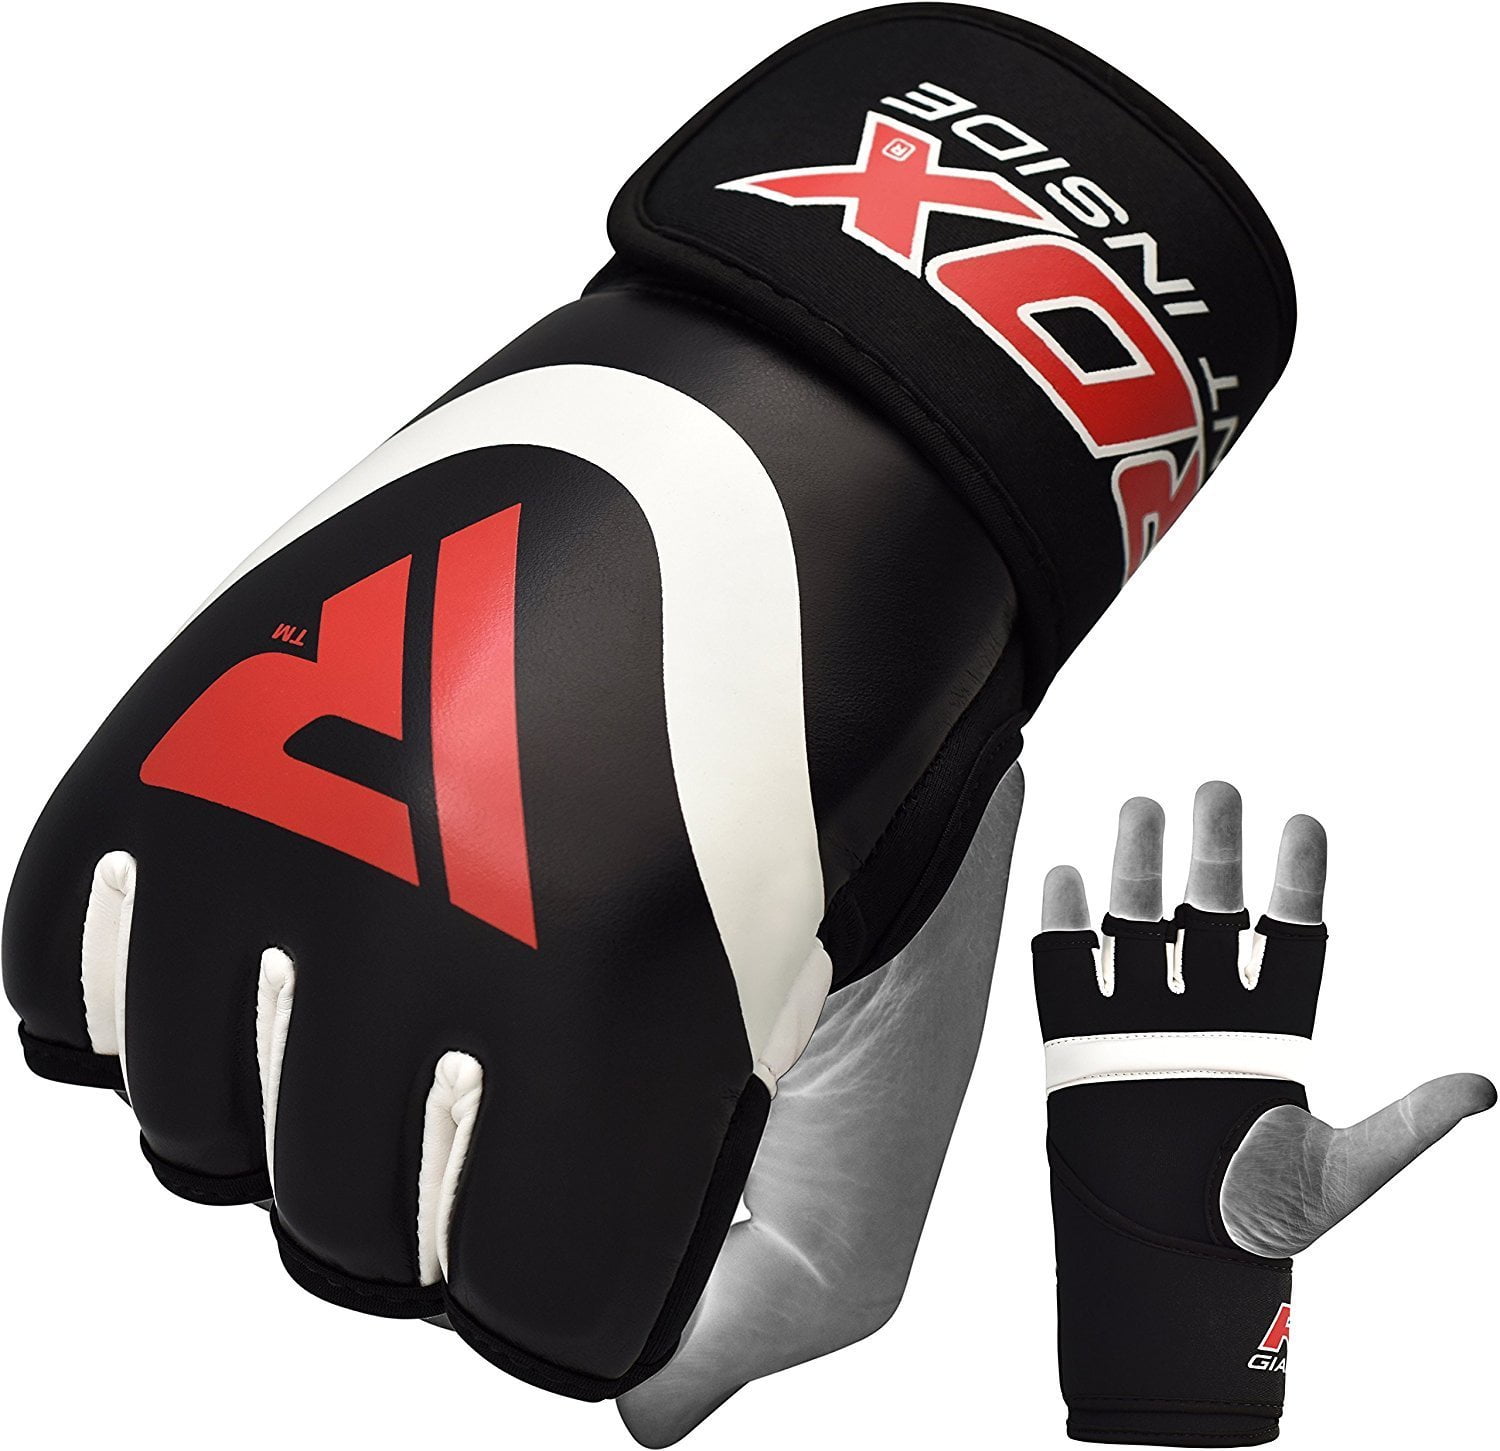 Boxing Inner BandageFoam Padded for Hand Knuckle Protection in RED and WHITE 